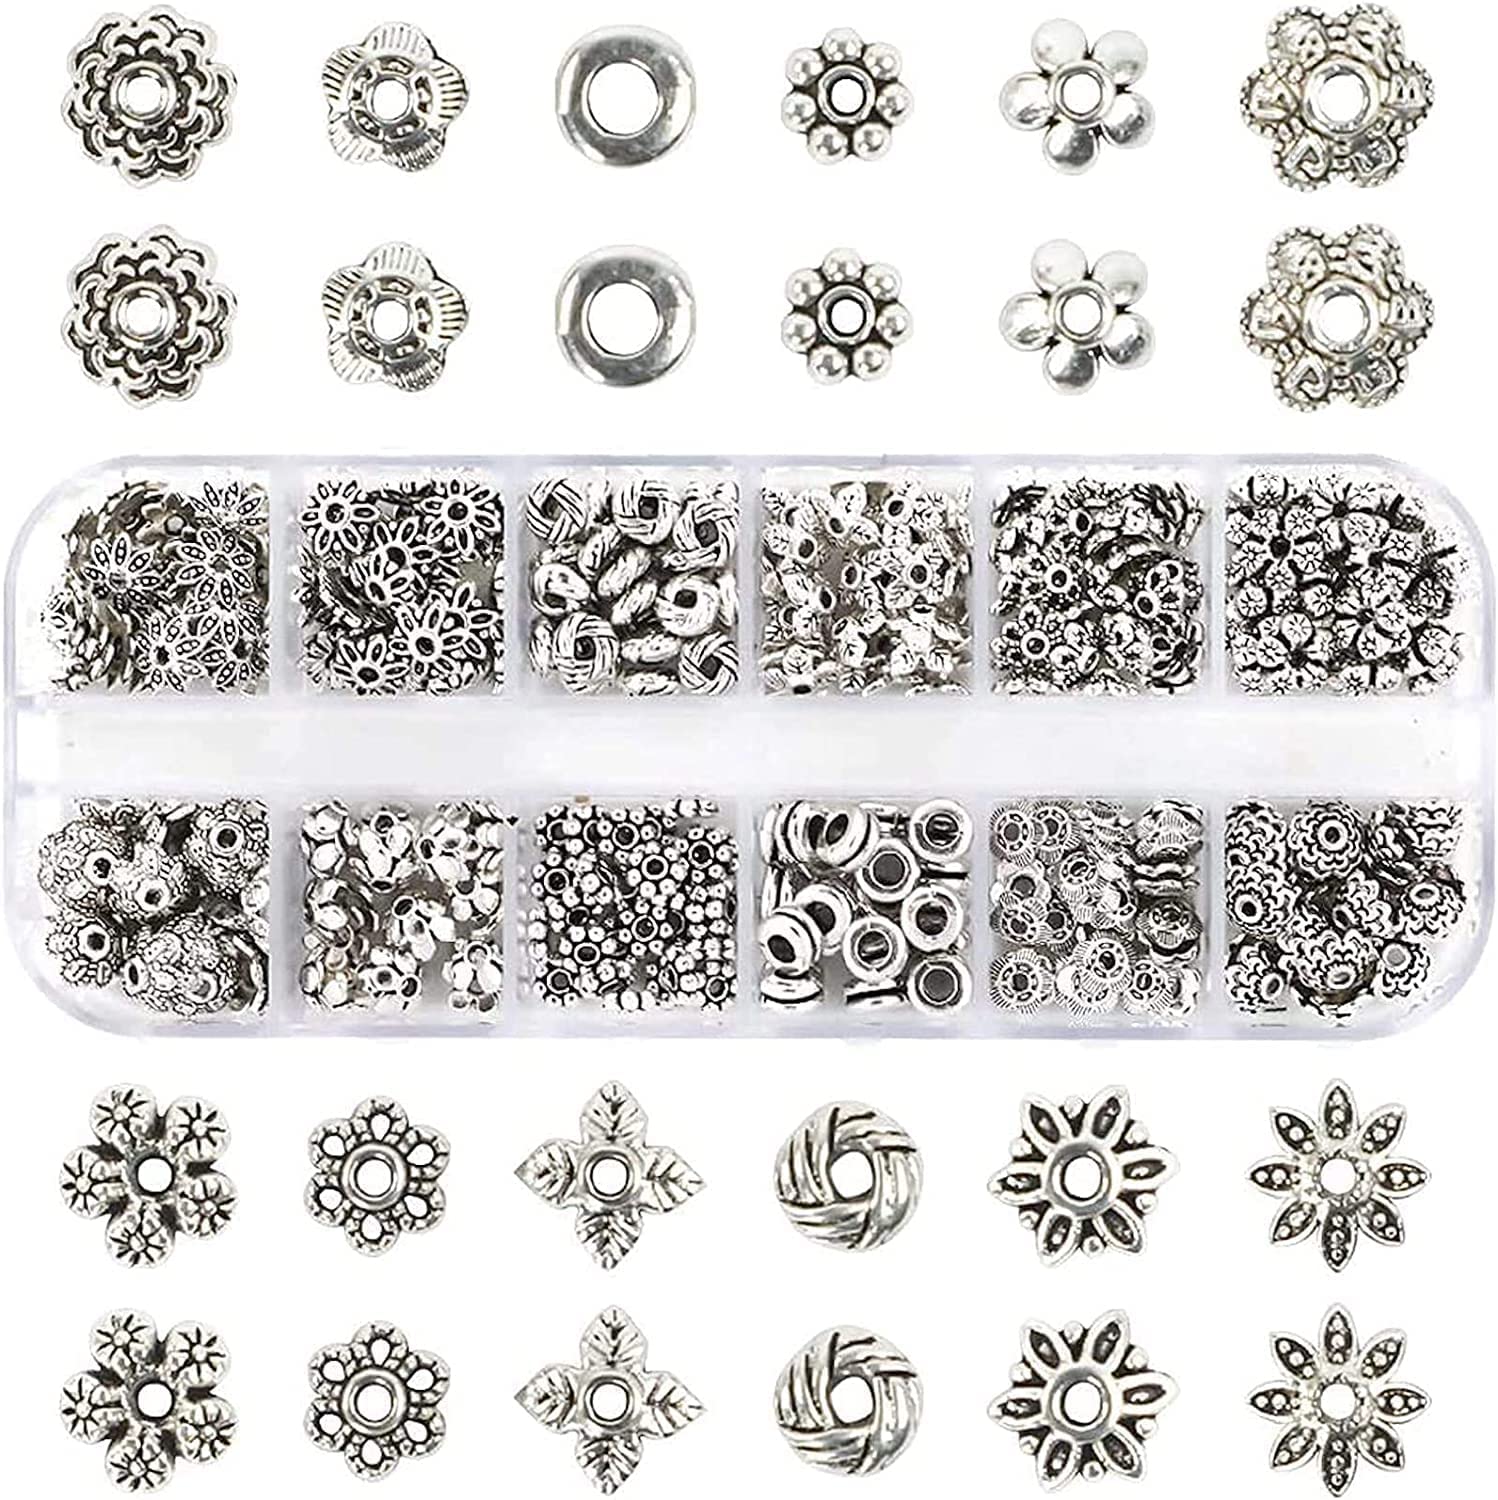 QUEFE 360pcs Silver Spacer Beads Caps of 12 Styles Jewelry Accessories for Bracelet Necklace Jewelry Making